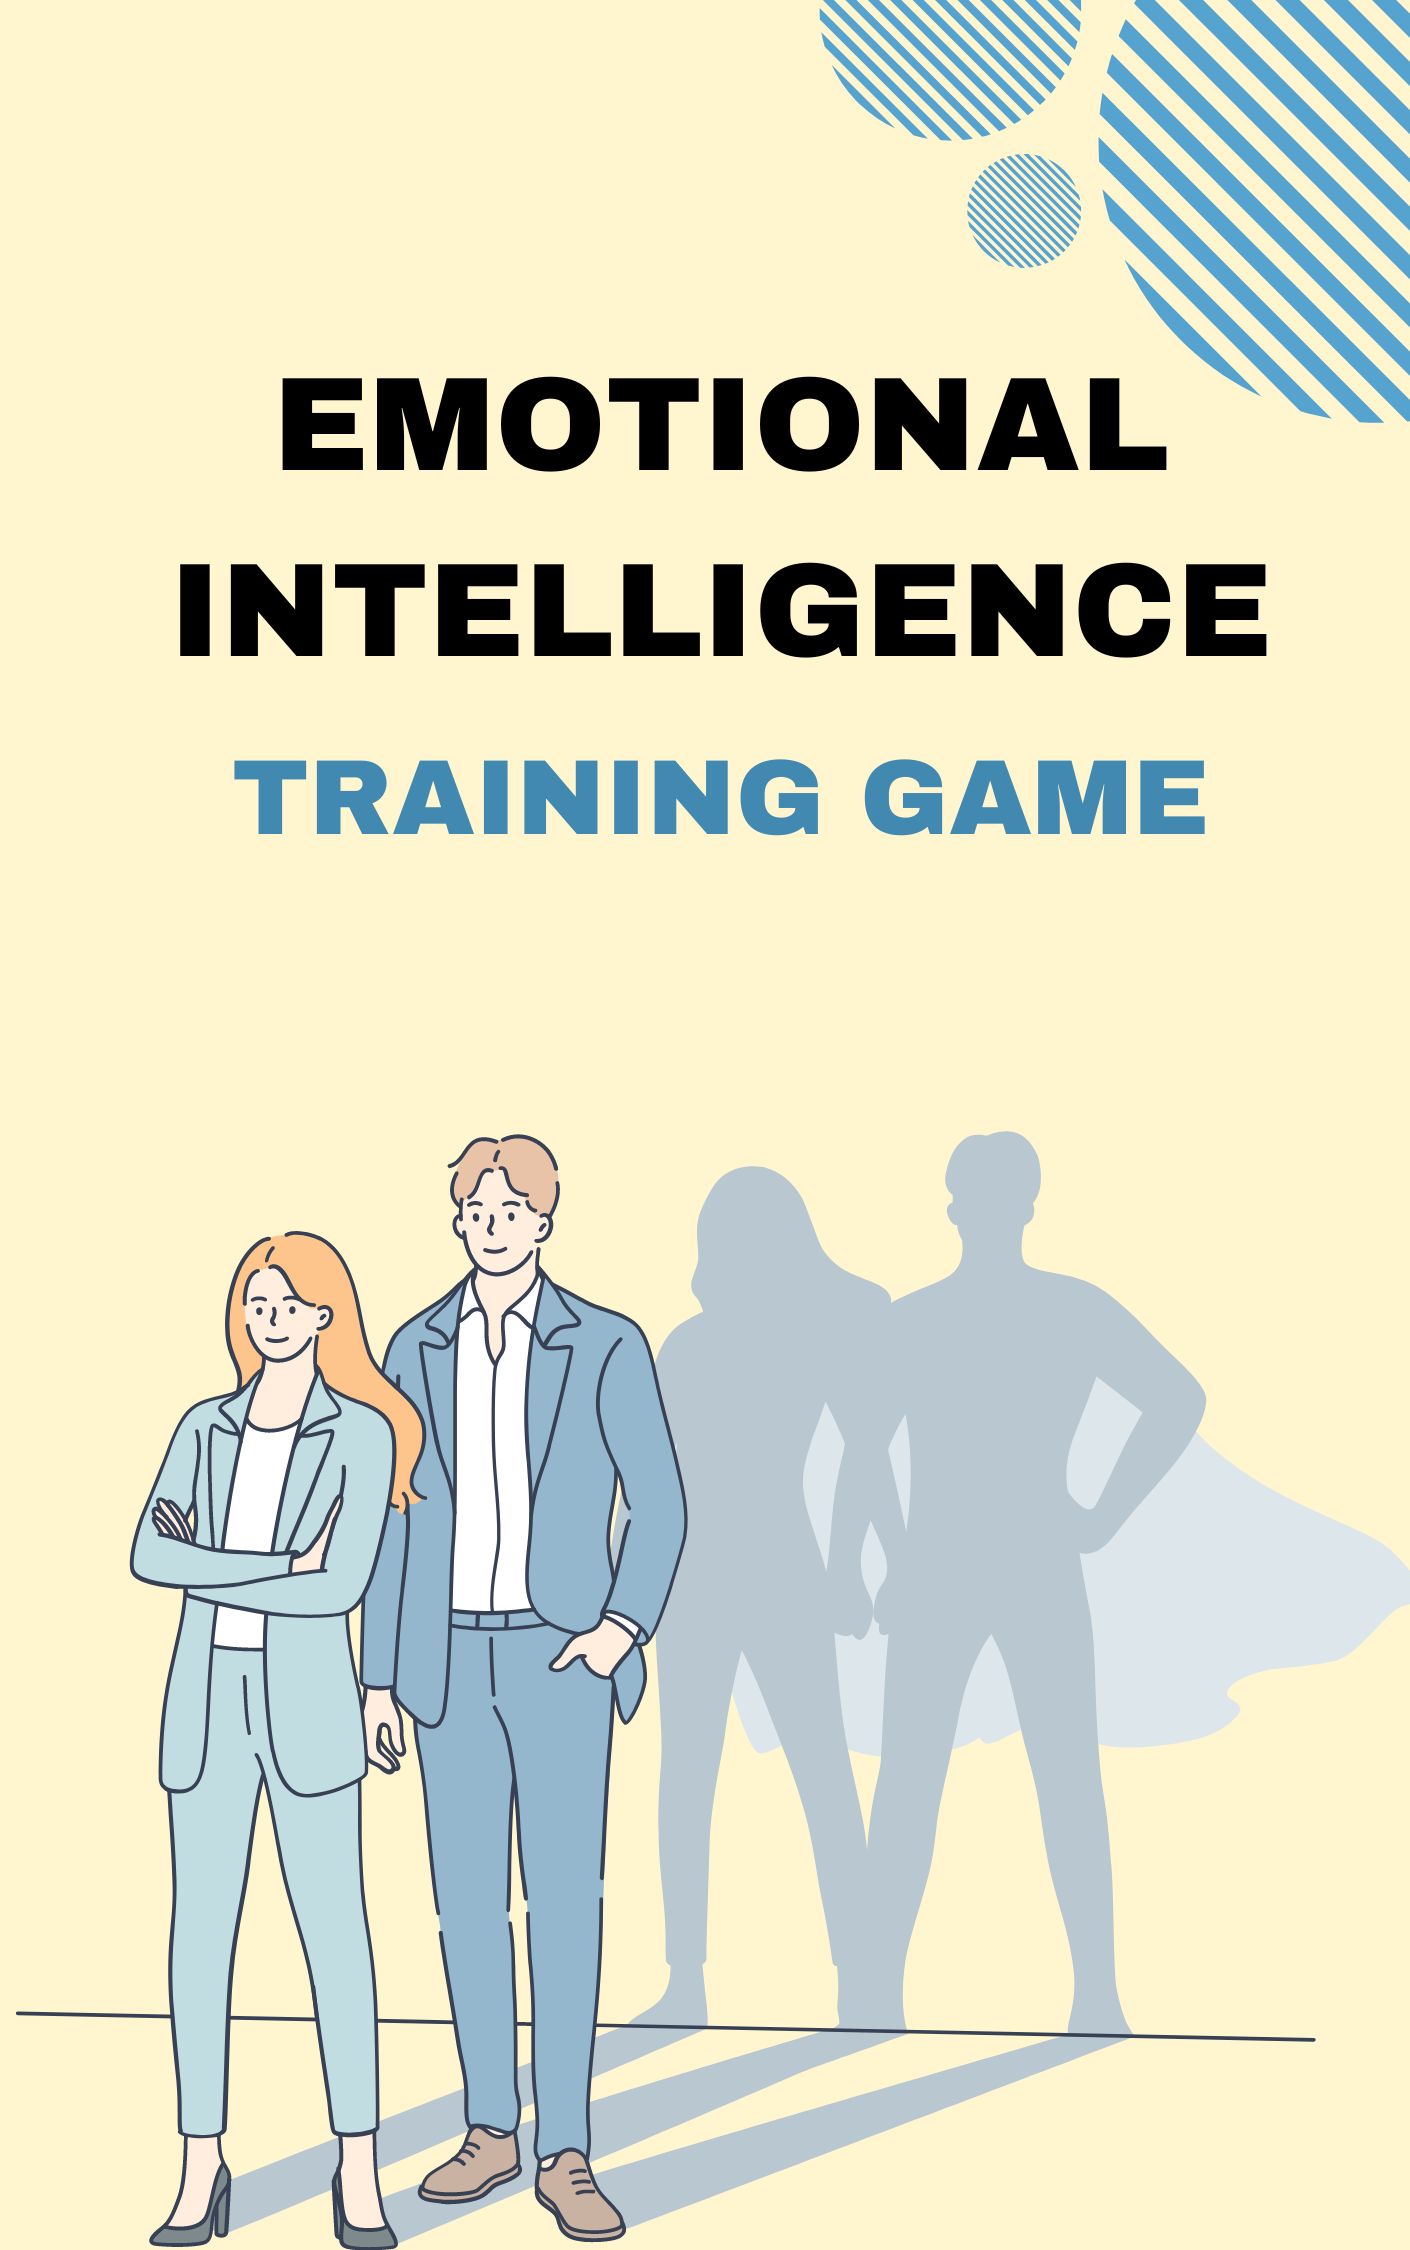 Emotional Intelligence training game for training consultants, training courses and HR managers